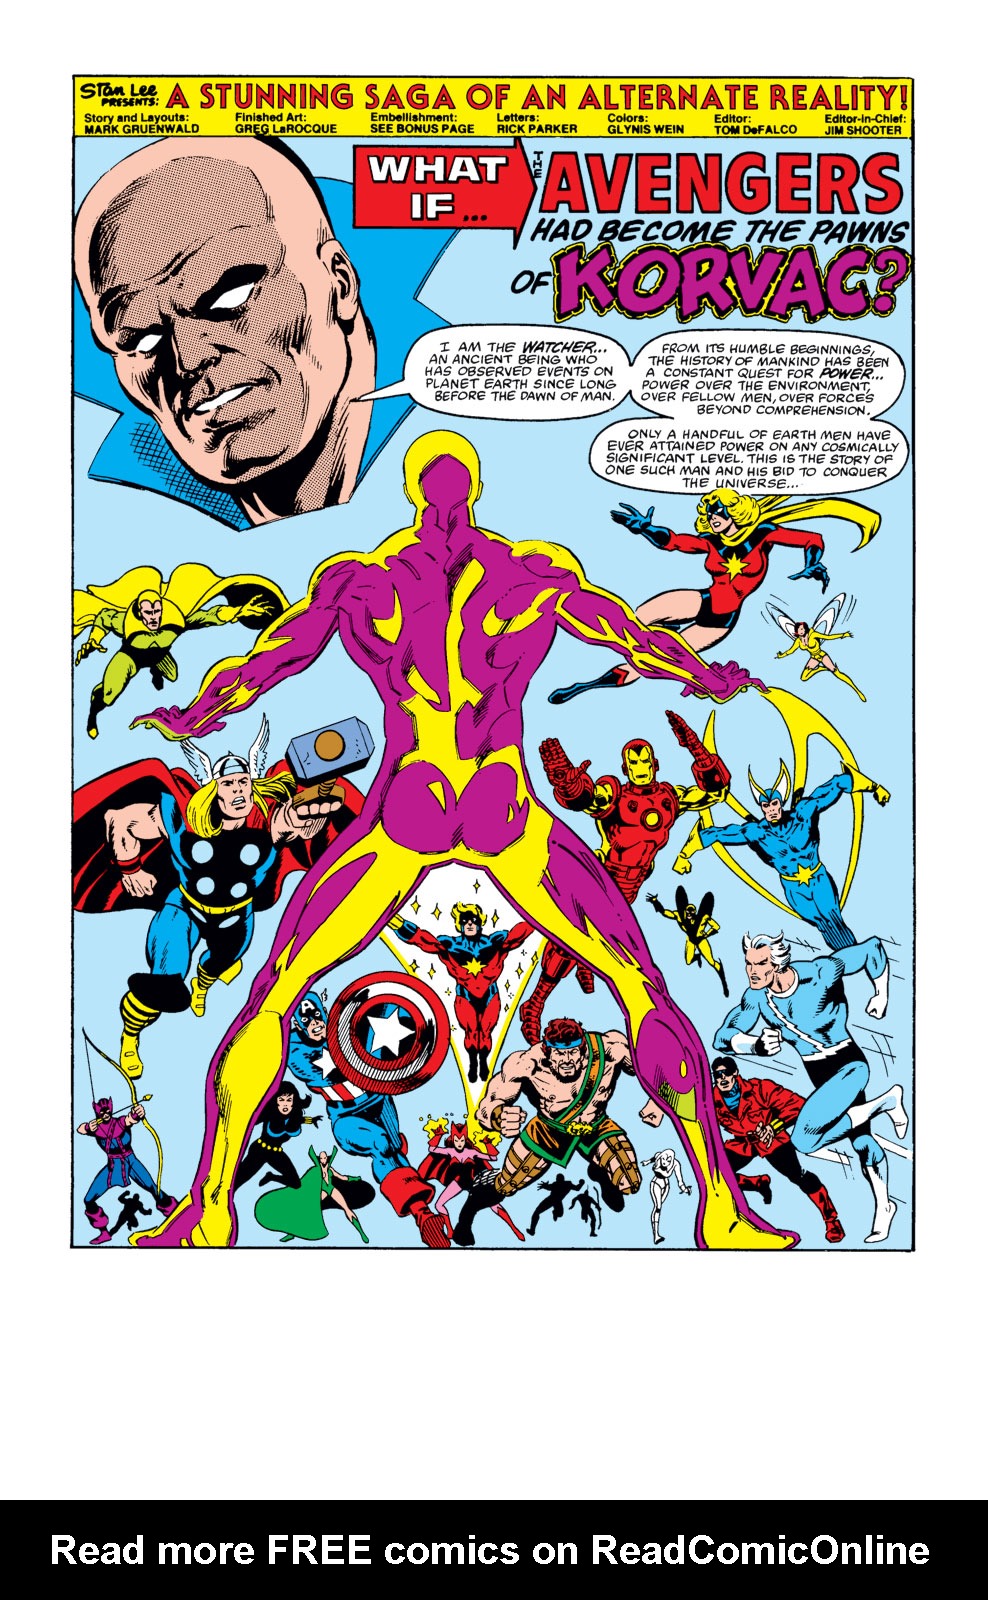 What If? (1977) issue 32 - The Avengers had become pawns of Korvac - Page 2